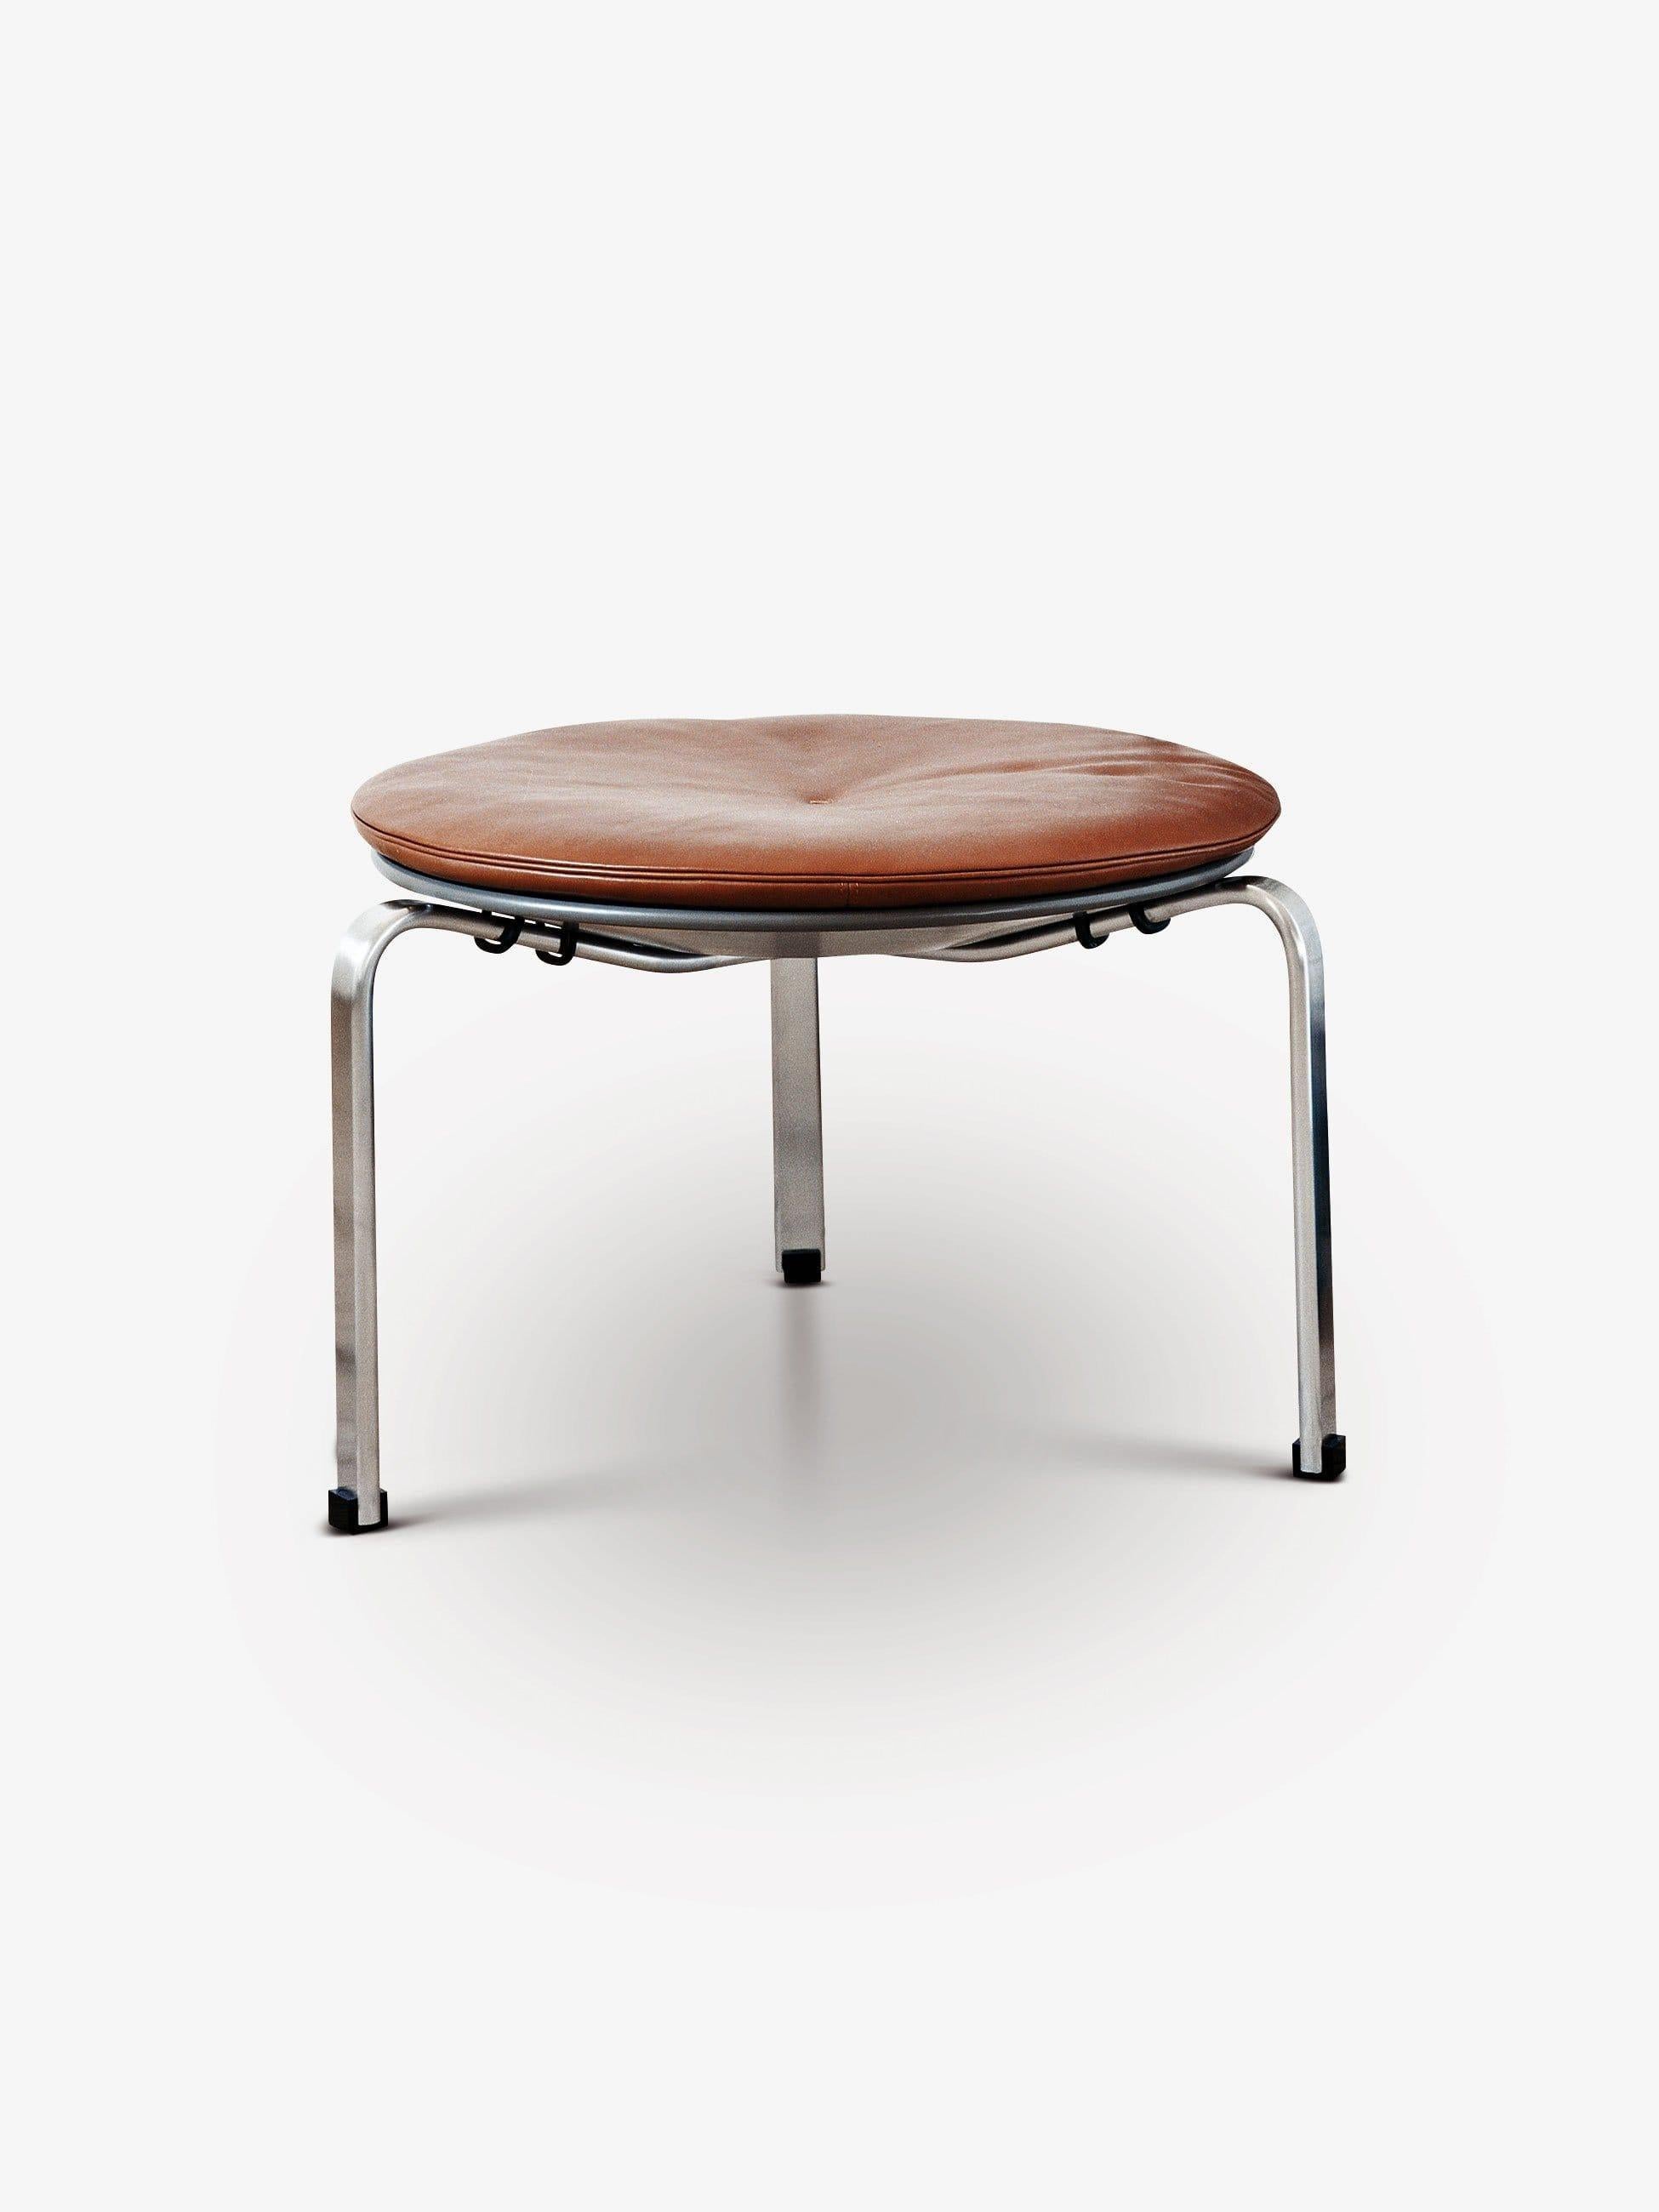 Poul Kjaerholm PK33 Stool in Rustic Leather by Fritz Hansen In New Condition For Sale In Sag Harbor, NY